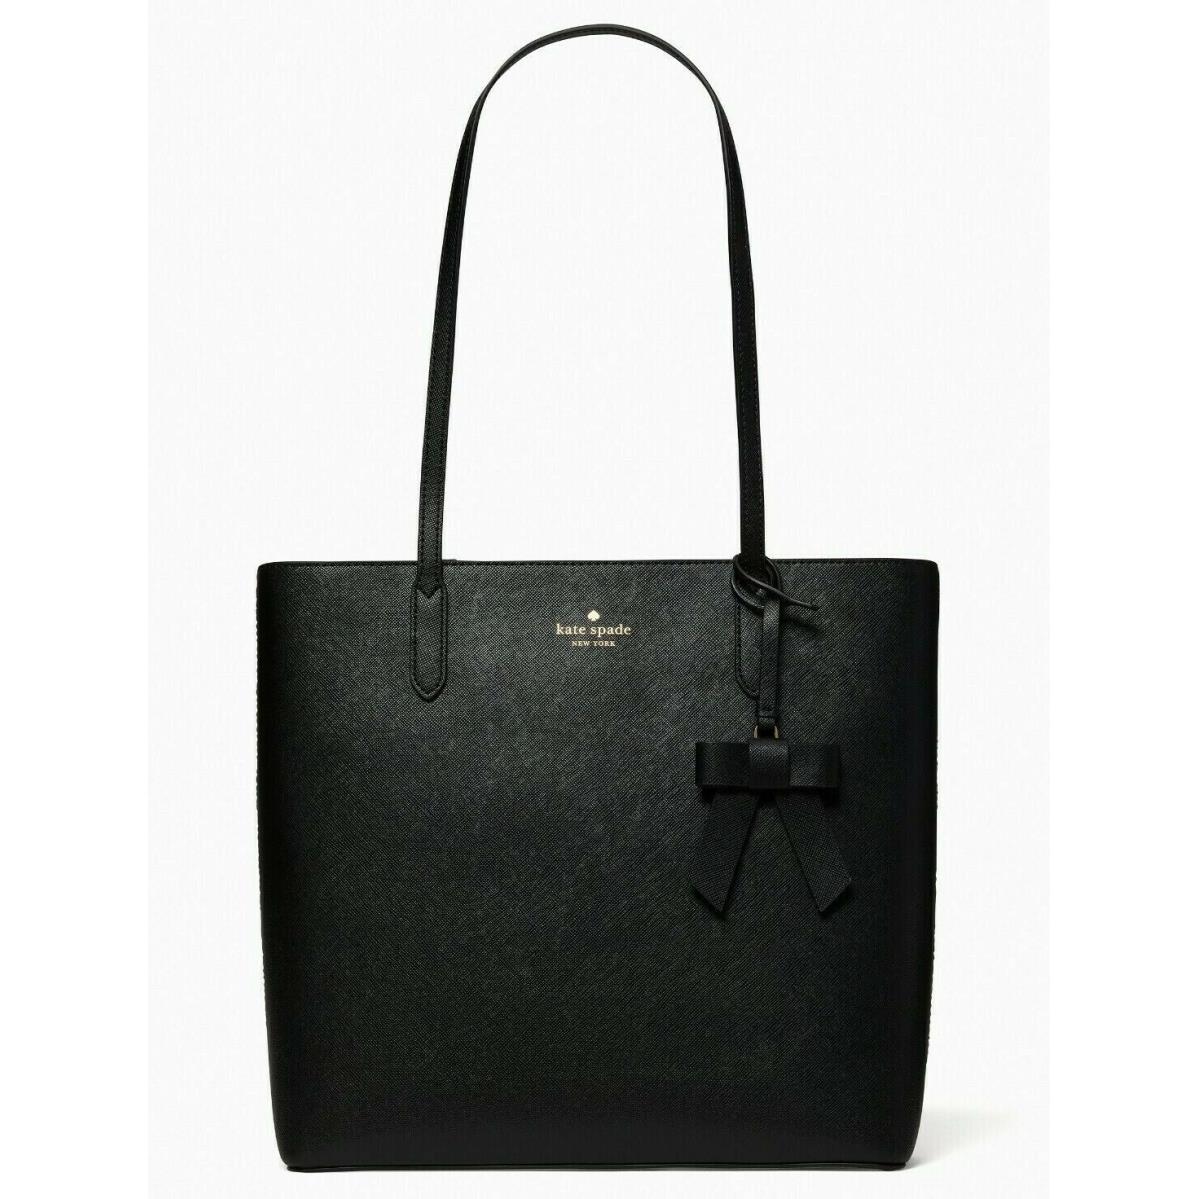 New Kate Spade Brynn Saffiano Tote Black with Dust Bag